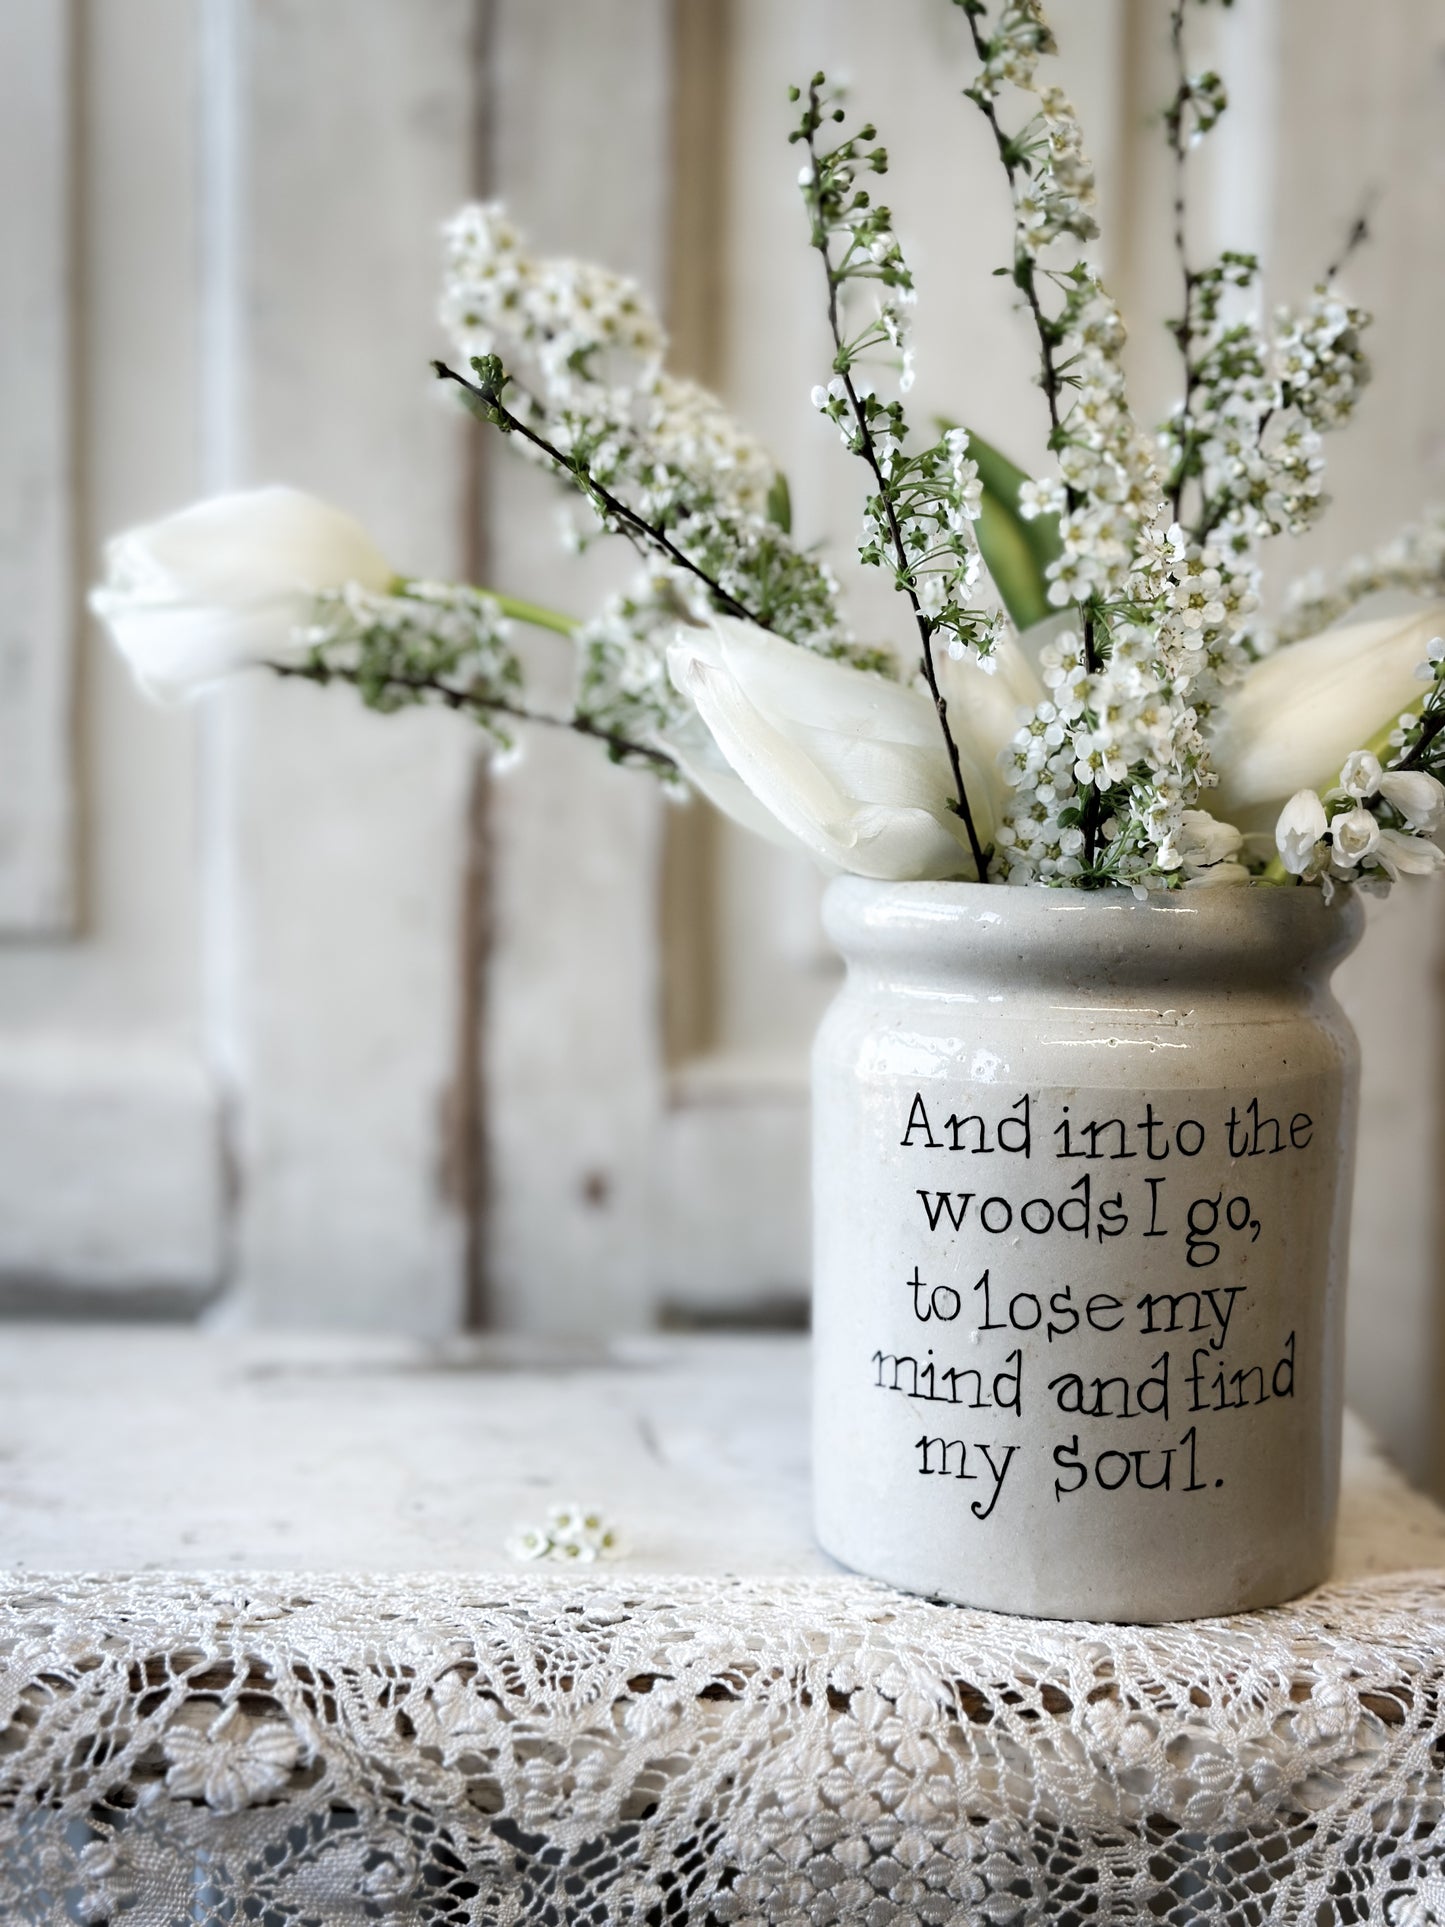 A Victorian unearthed stoneware pottery preserve jar with a hand painted quote